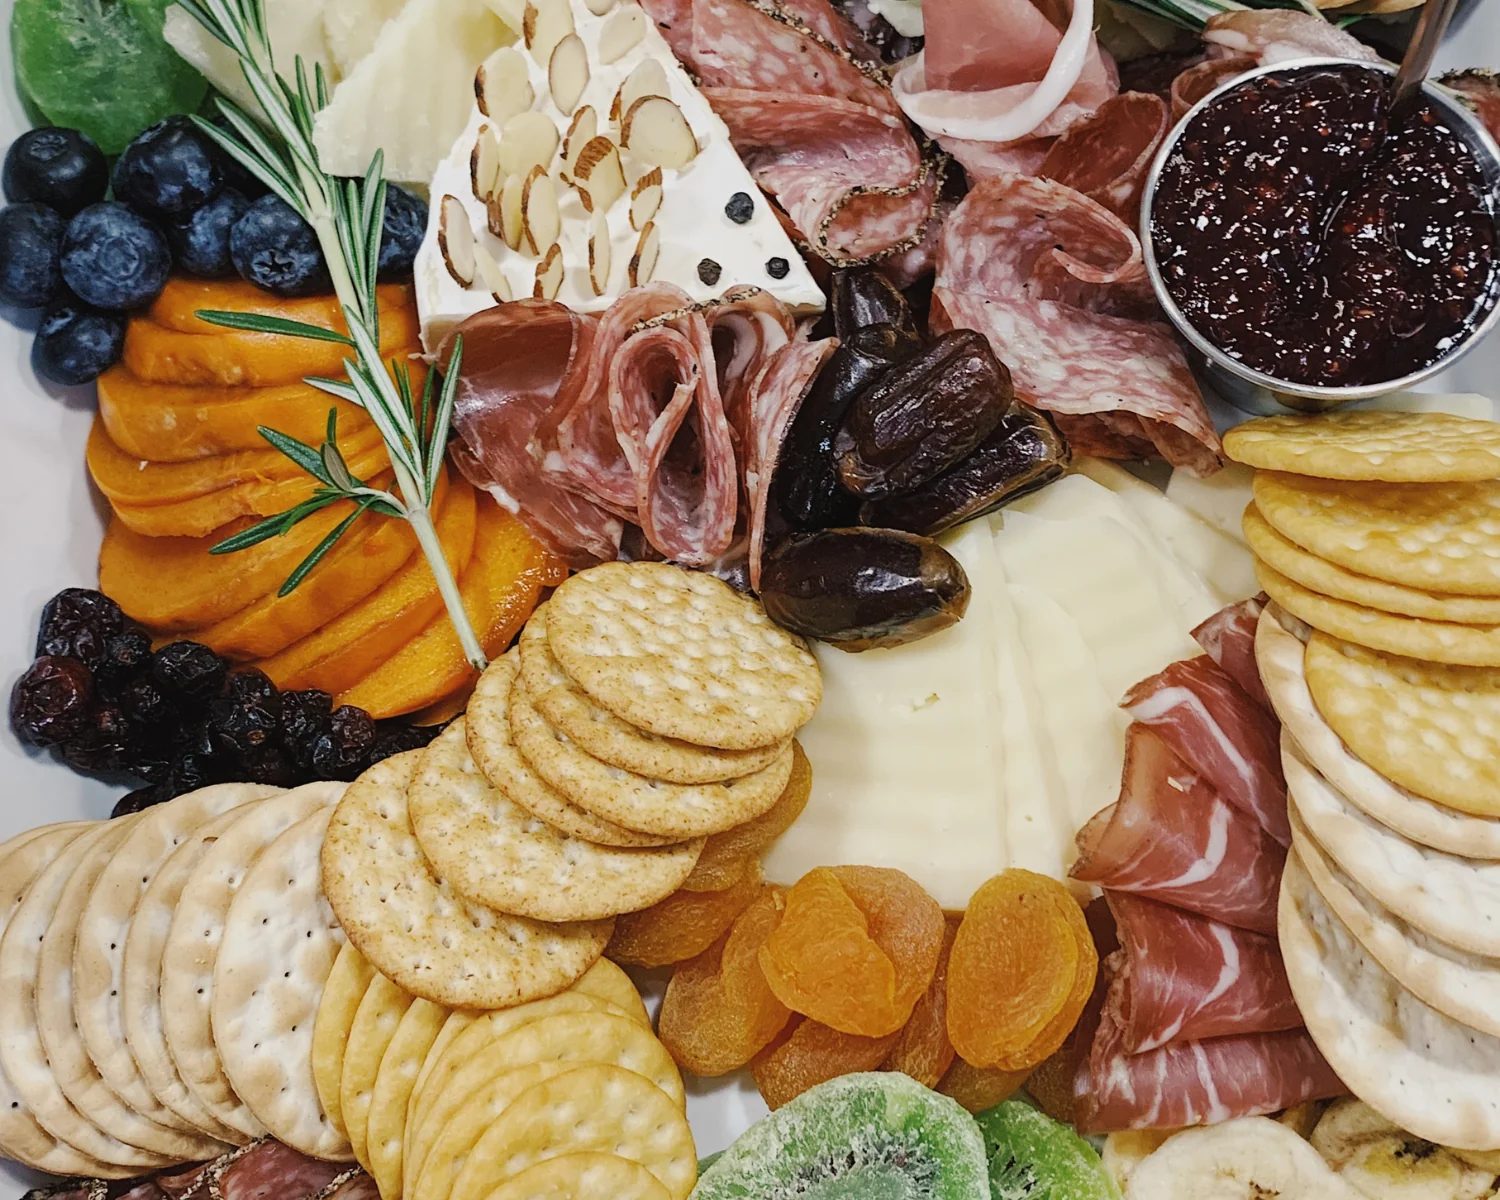 Charcuterie board of meats, cheese, crackers, nuts, fruit, and jam